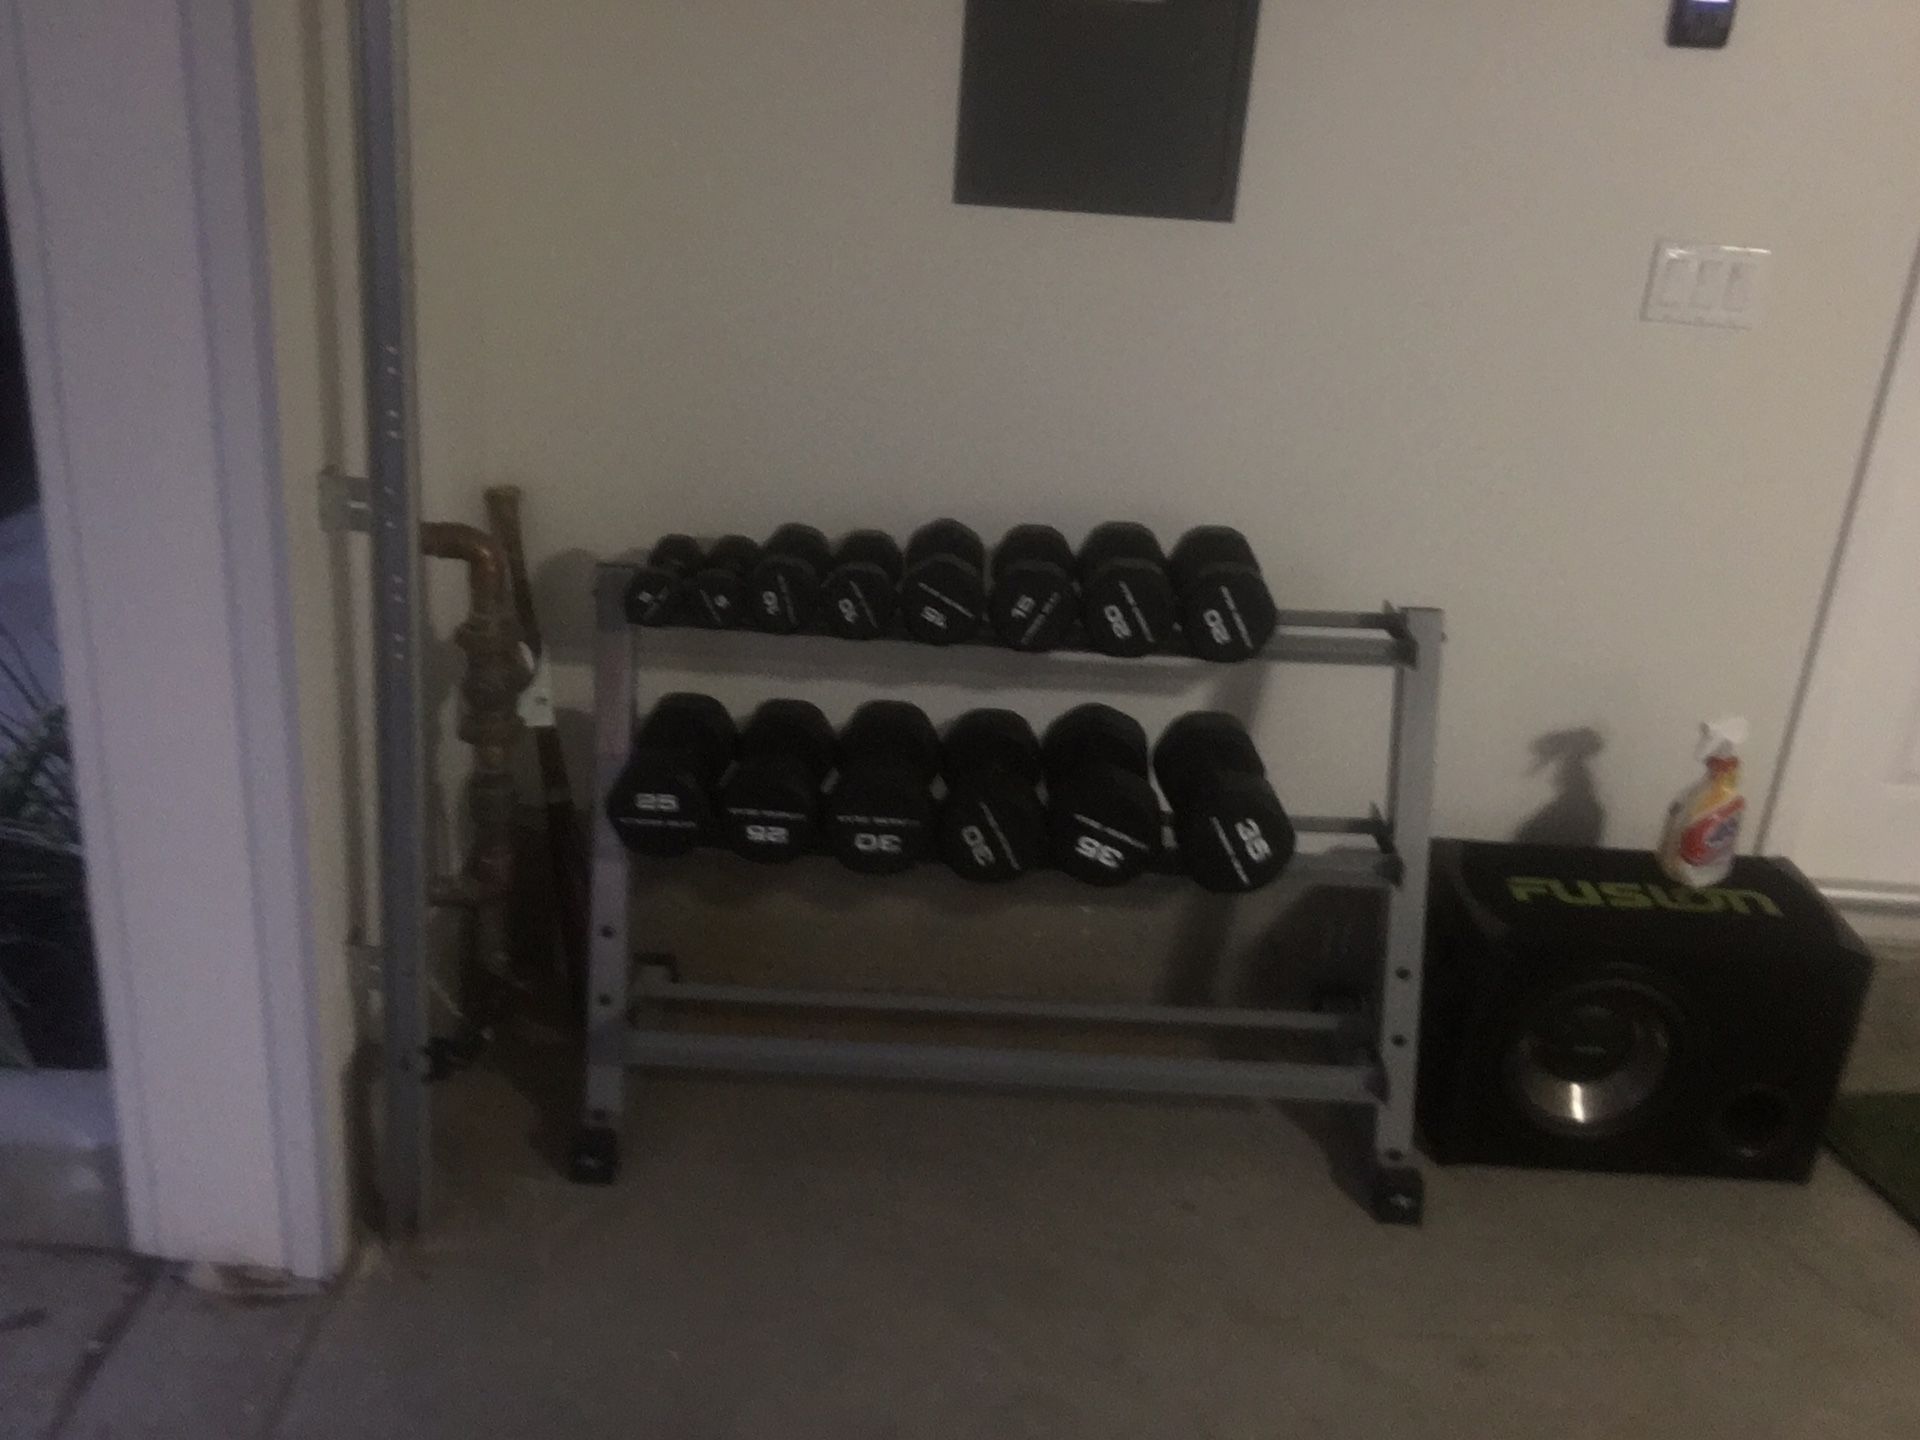 Selling all dumbbells and rack as a whole for $200. Every item was bought at Dicks sporting goods well over for what I paid for.